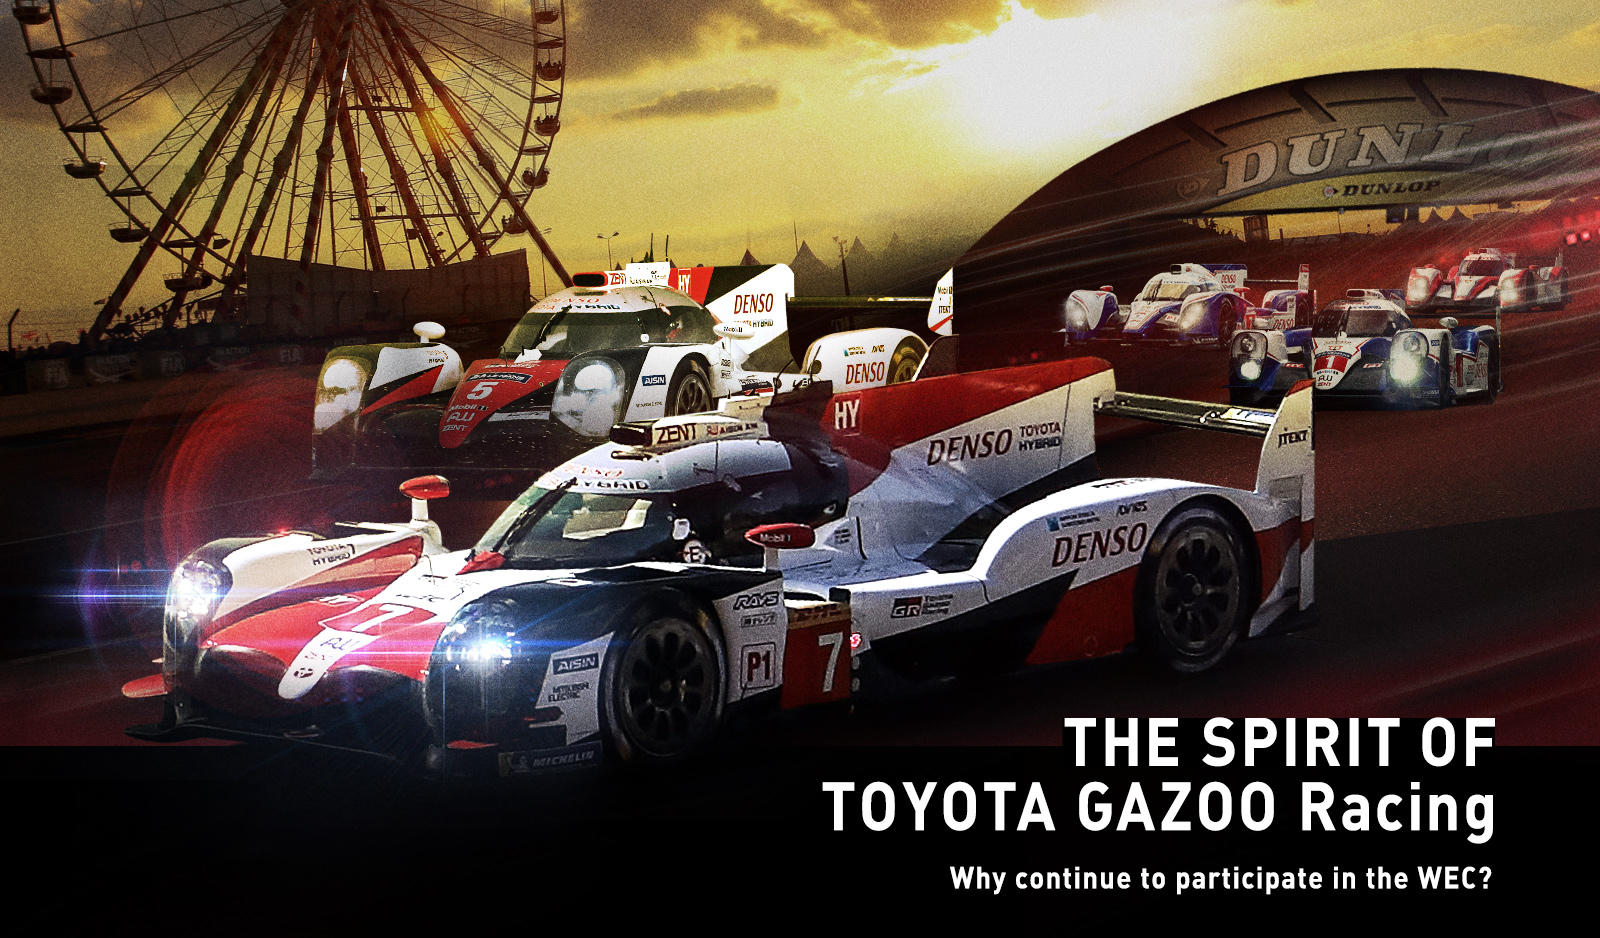 THE SPIRIT OF TOYOTA GAZOO Racing -Why do you continue to participate in ther WEC?-